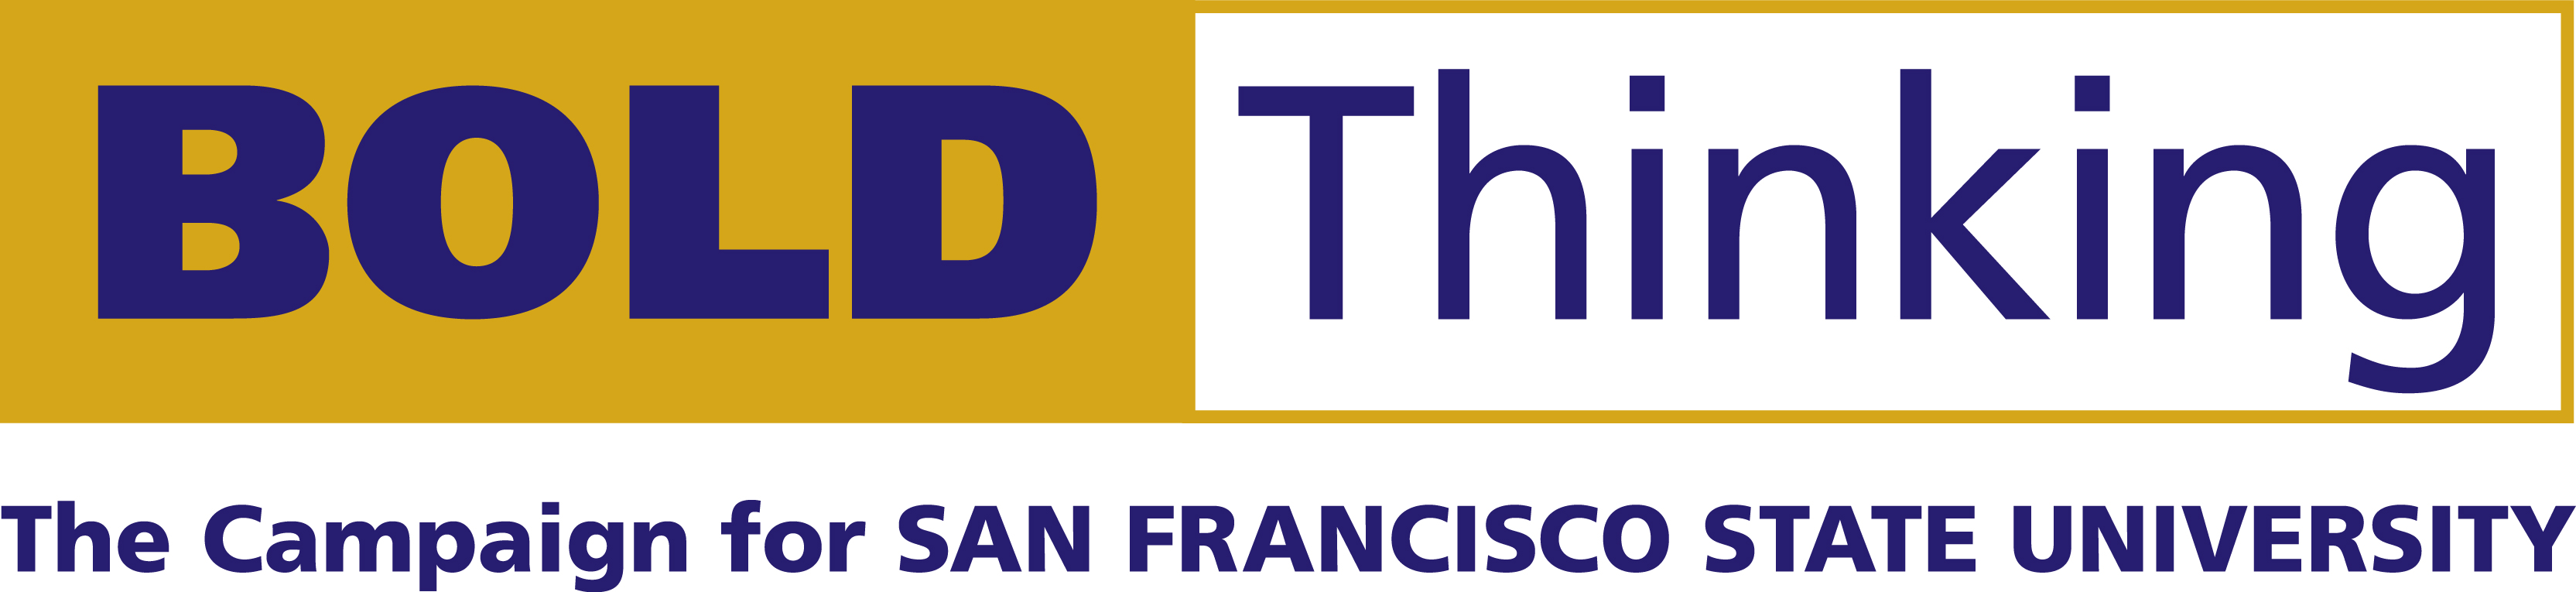 bold thinking the campaign for San Francisco State University